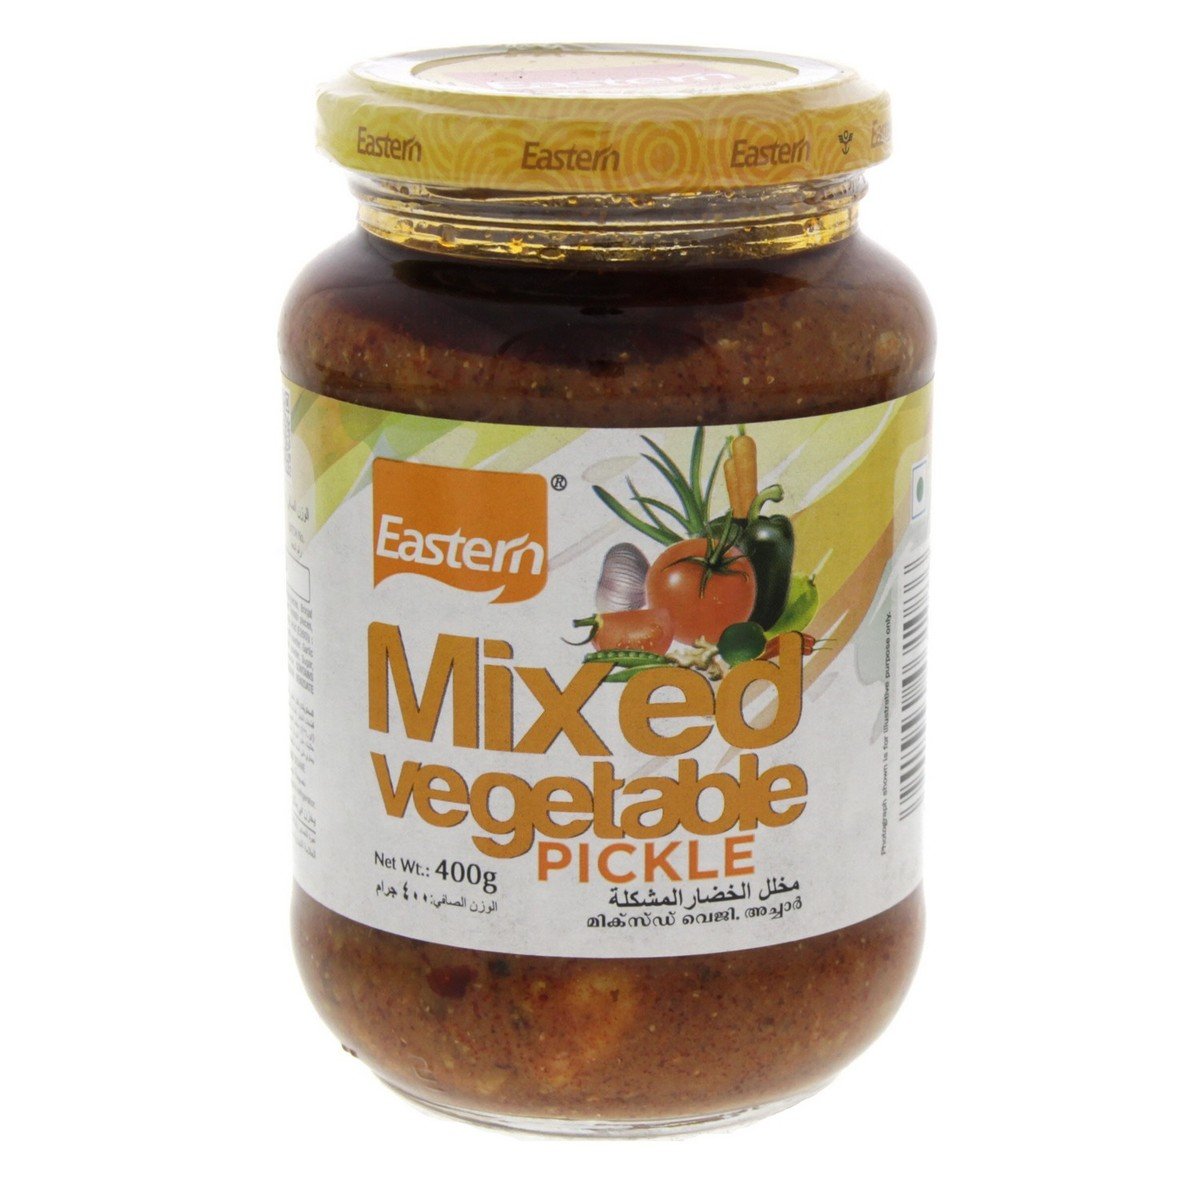 Eastern Mixed Vegetable Pickle 400g